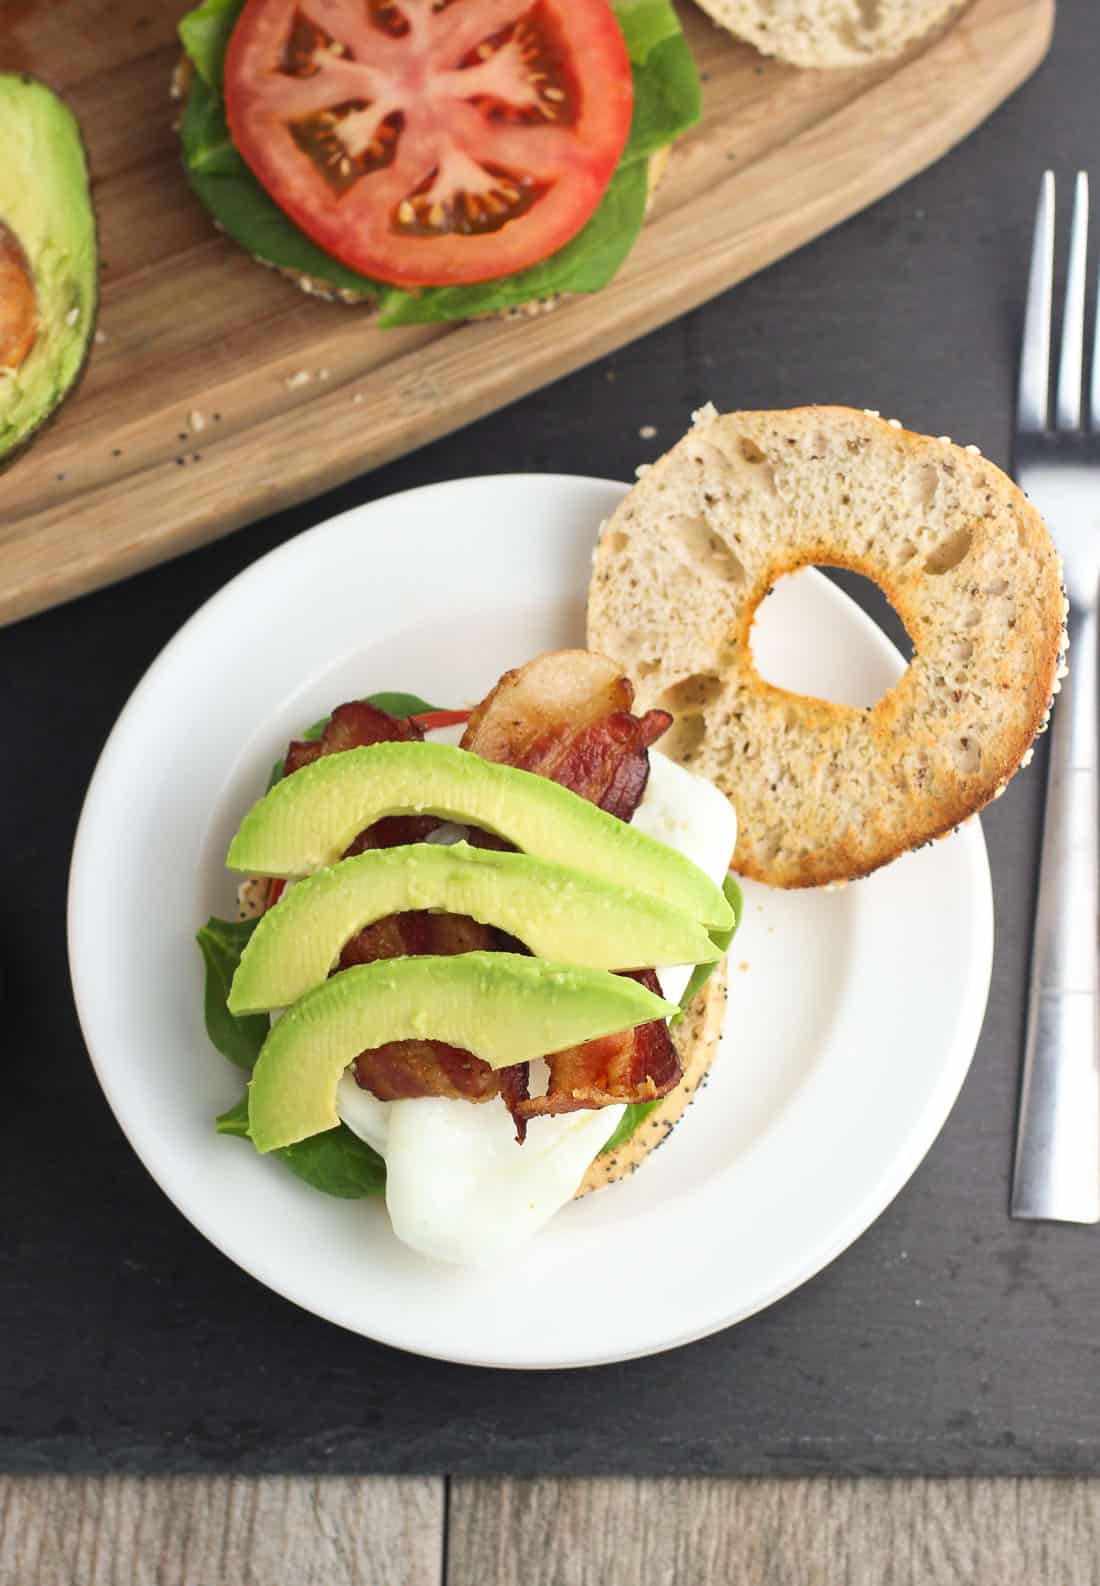 An open face breakfast sauce featuring lettuce, bacon, tomato slices, avocado slices, and an egg on a toasted bagel thin